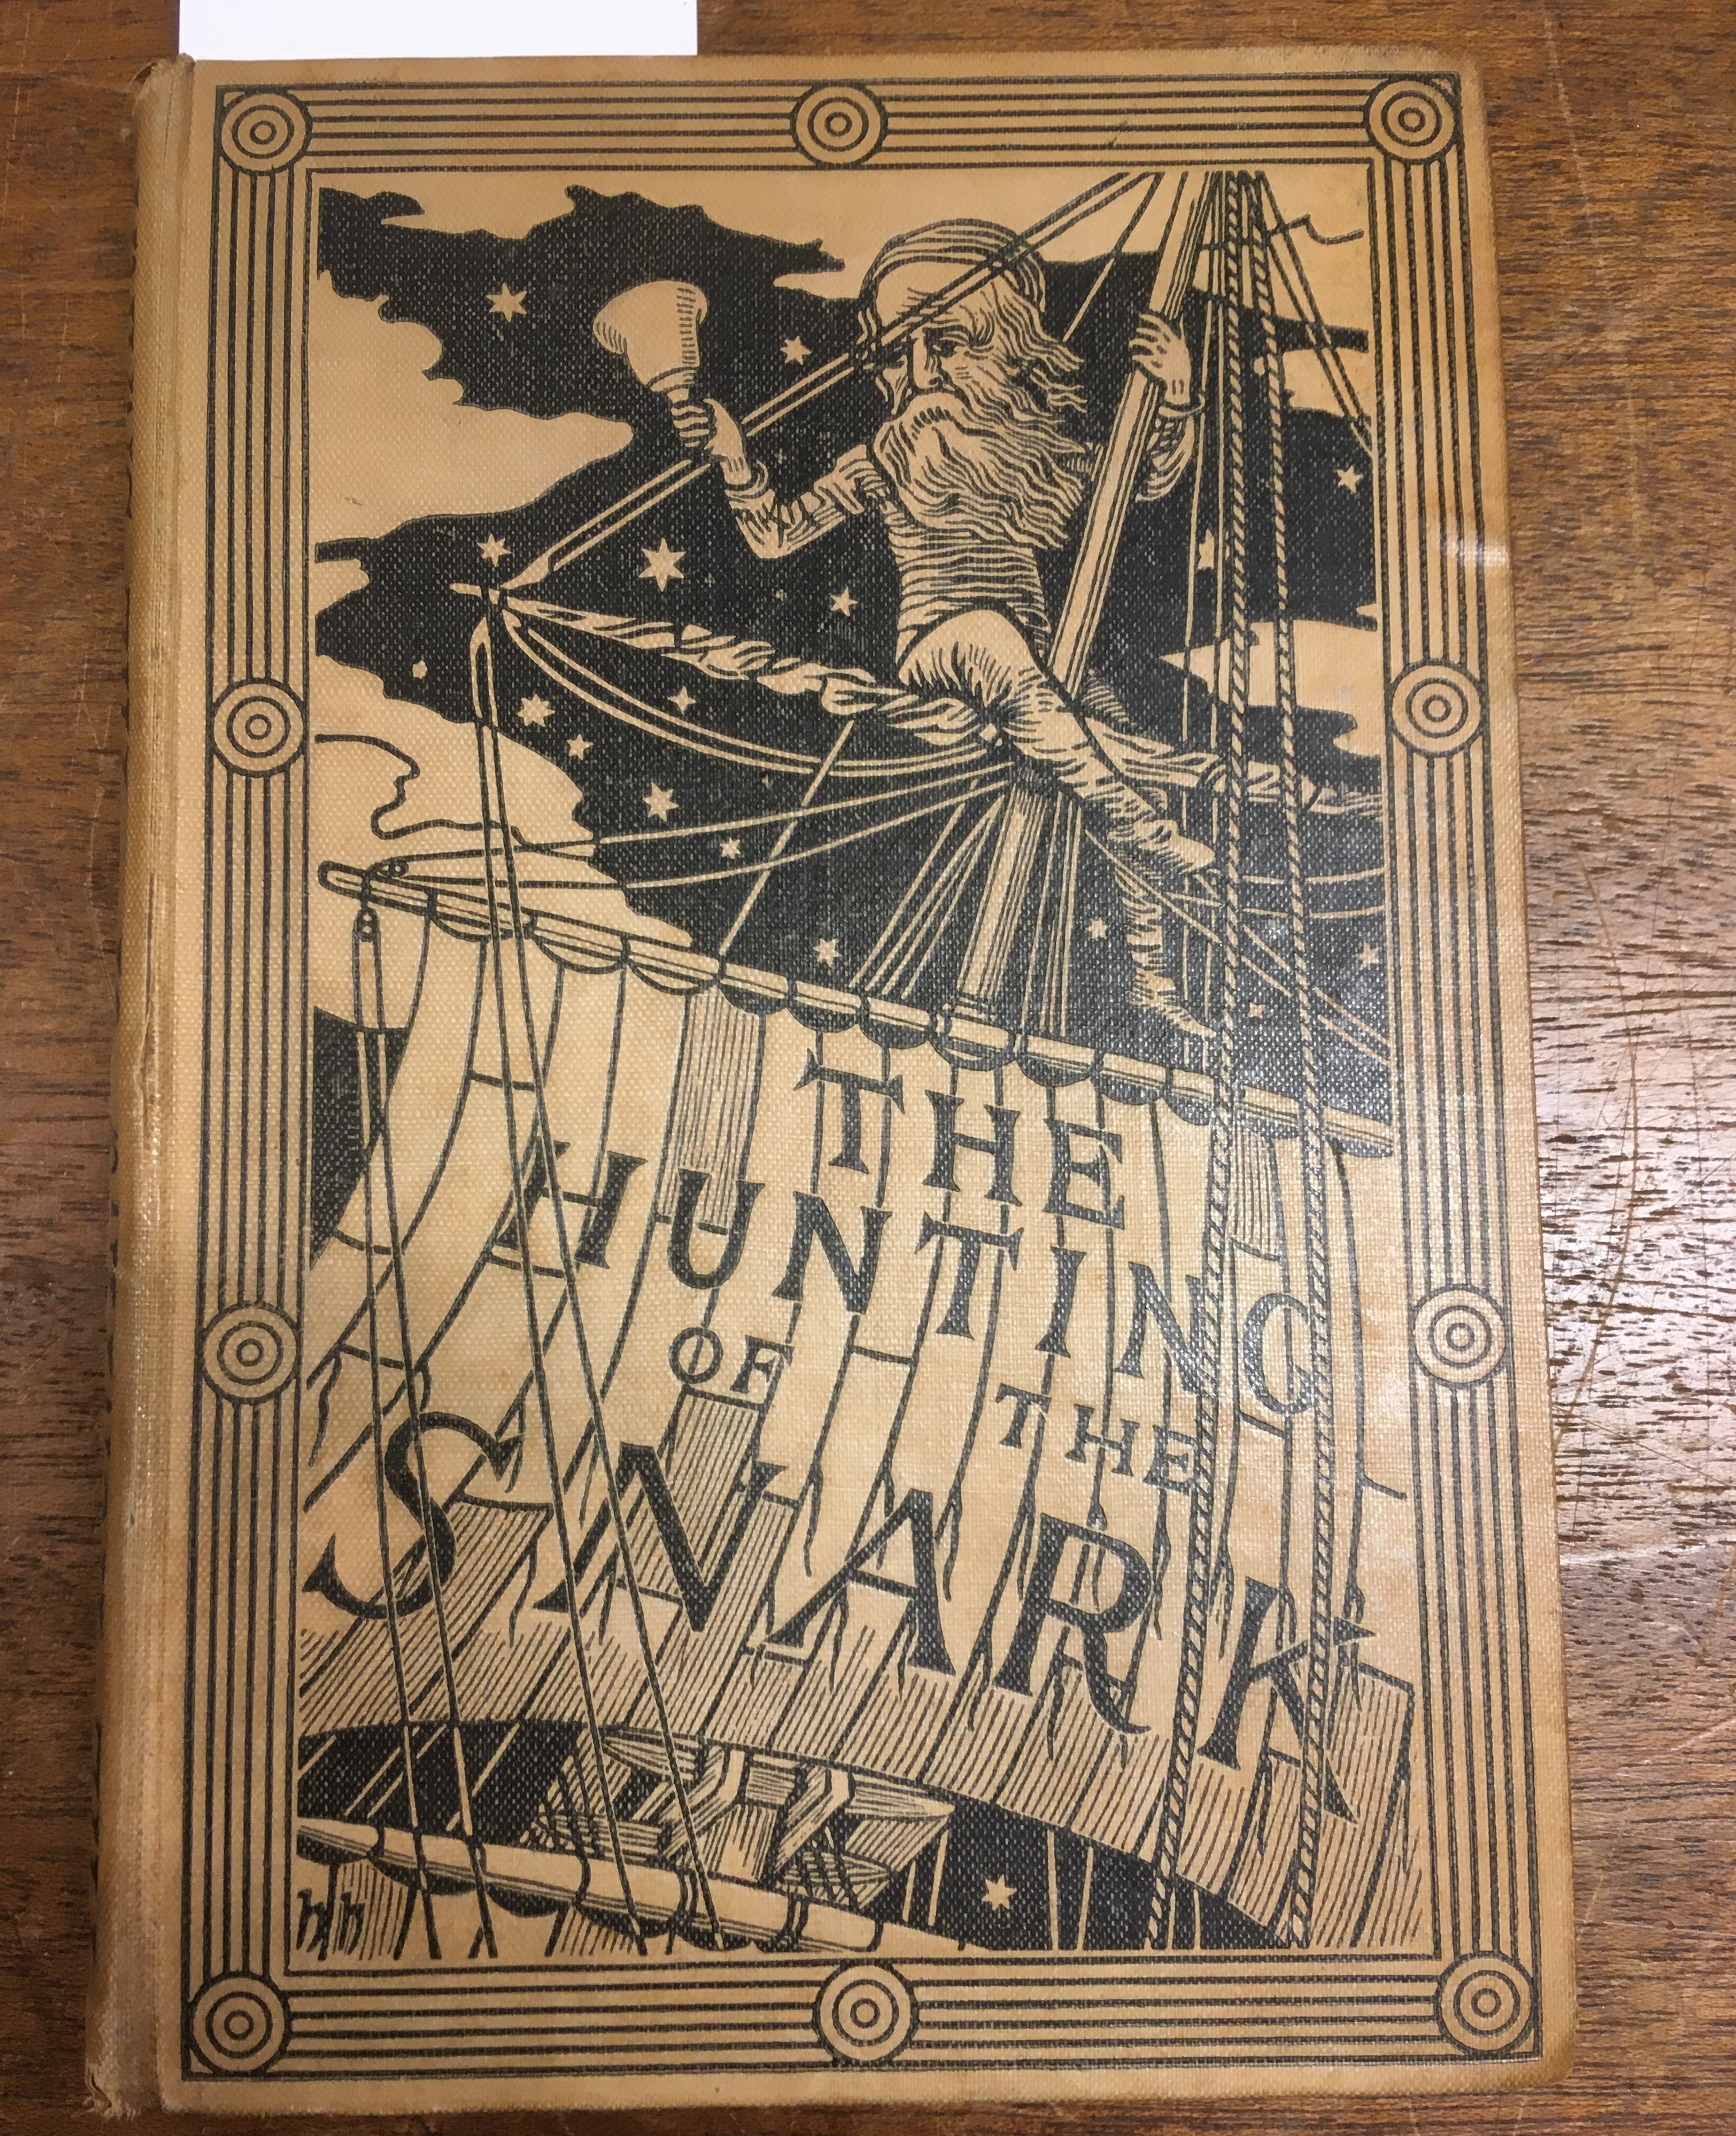 Dodgson (Charles Lutwidge, "Lewis Carroll"). The Hunting of the Snark, 1st edition, 1876 - Image 4 of 7